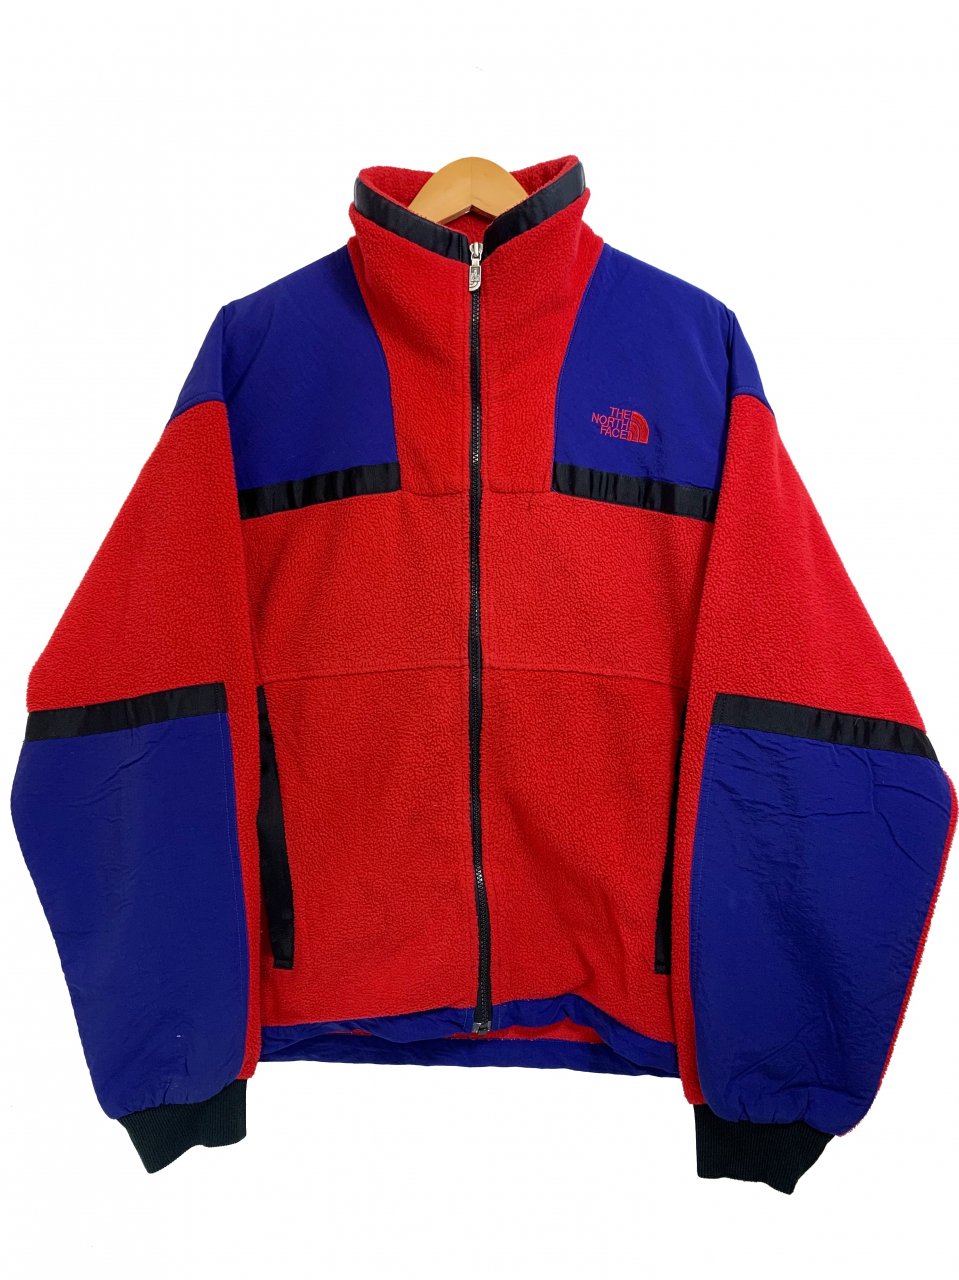 USA製 90s THE NORTH FACE Zip-Up Fleece Jacket 赤青 L ノース